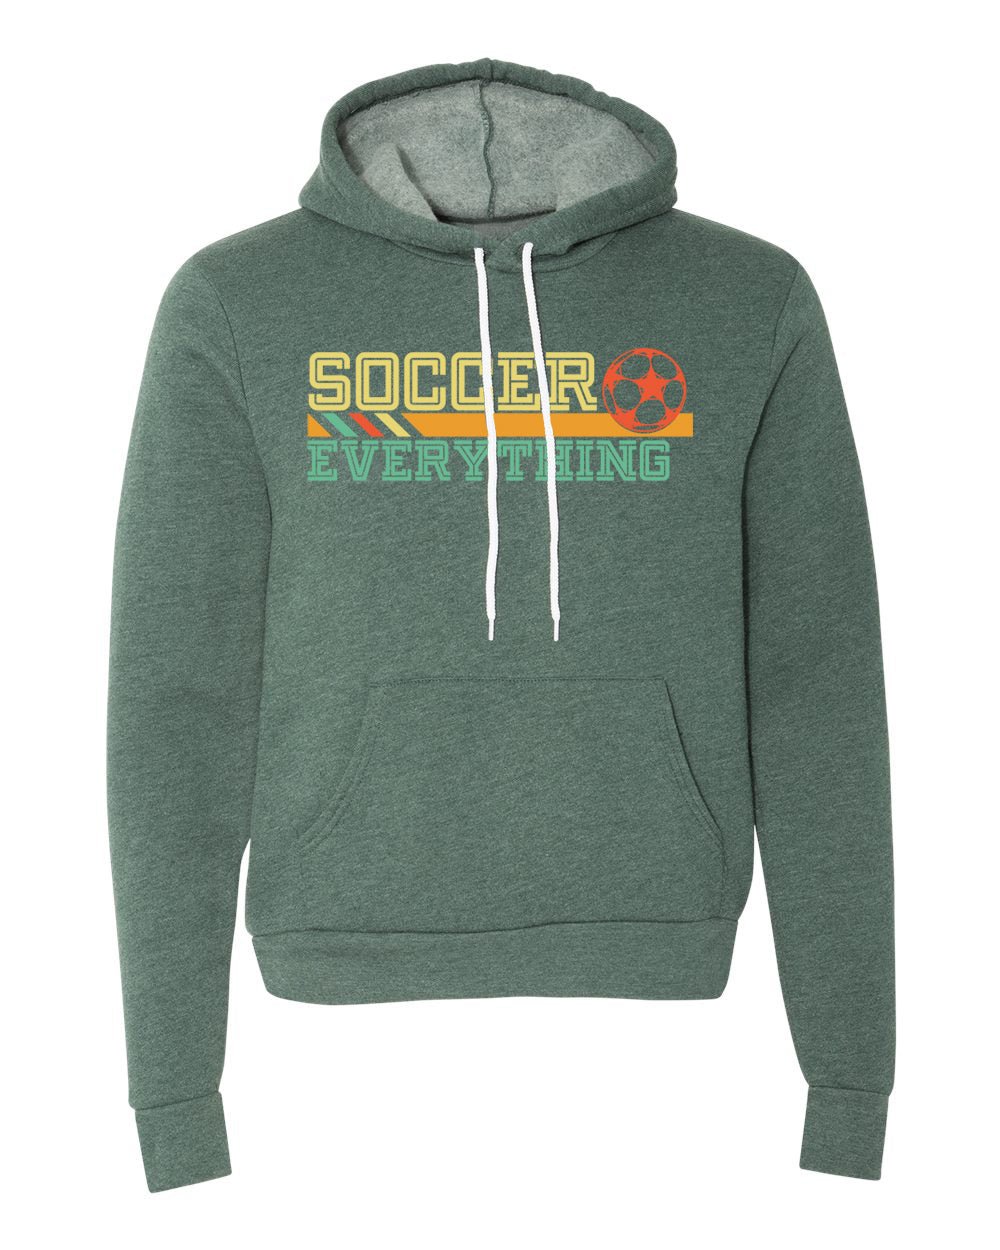 Soccer Over Everything Unisex Hoodies - Mato & Hash